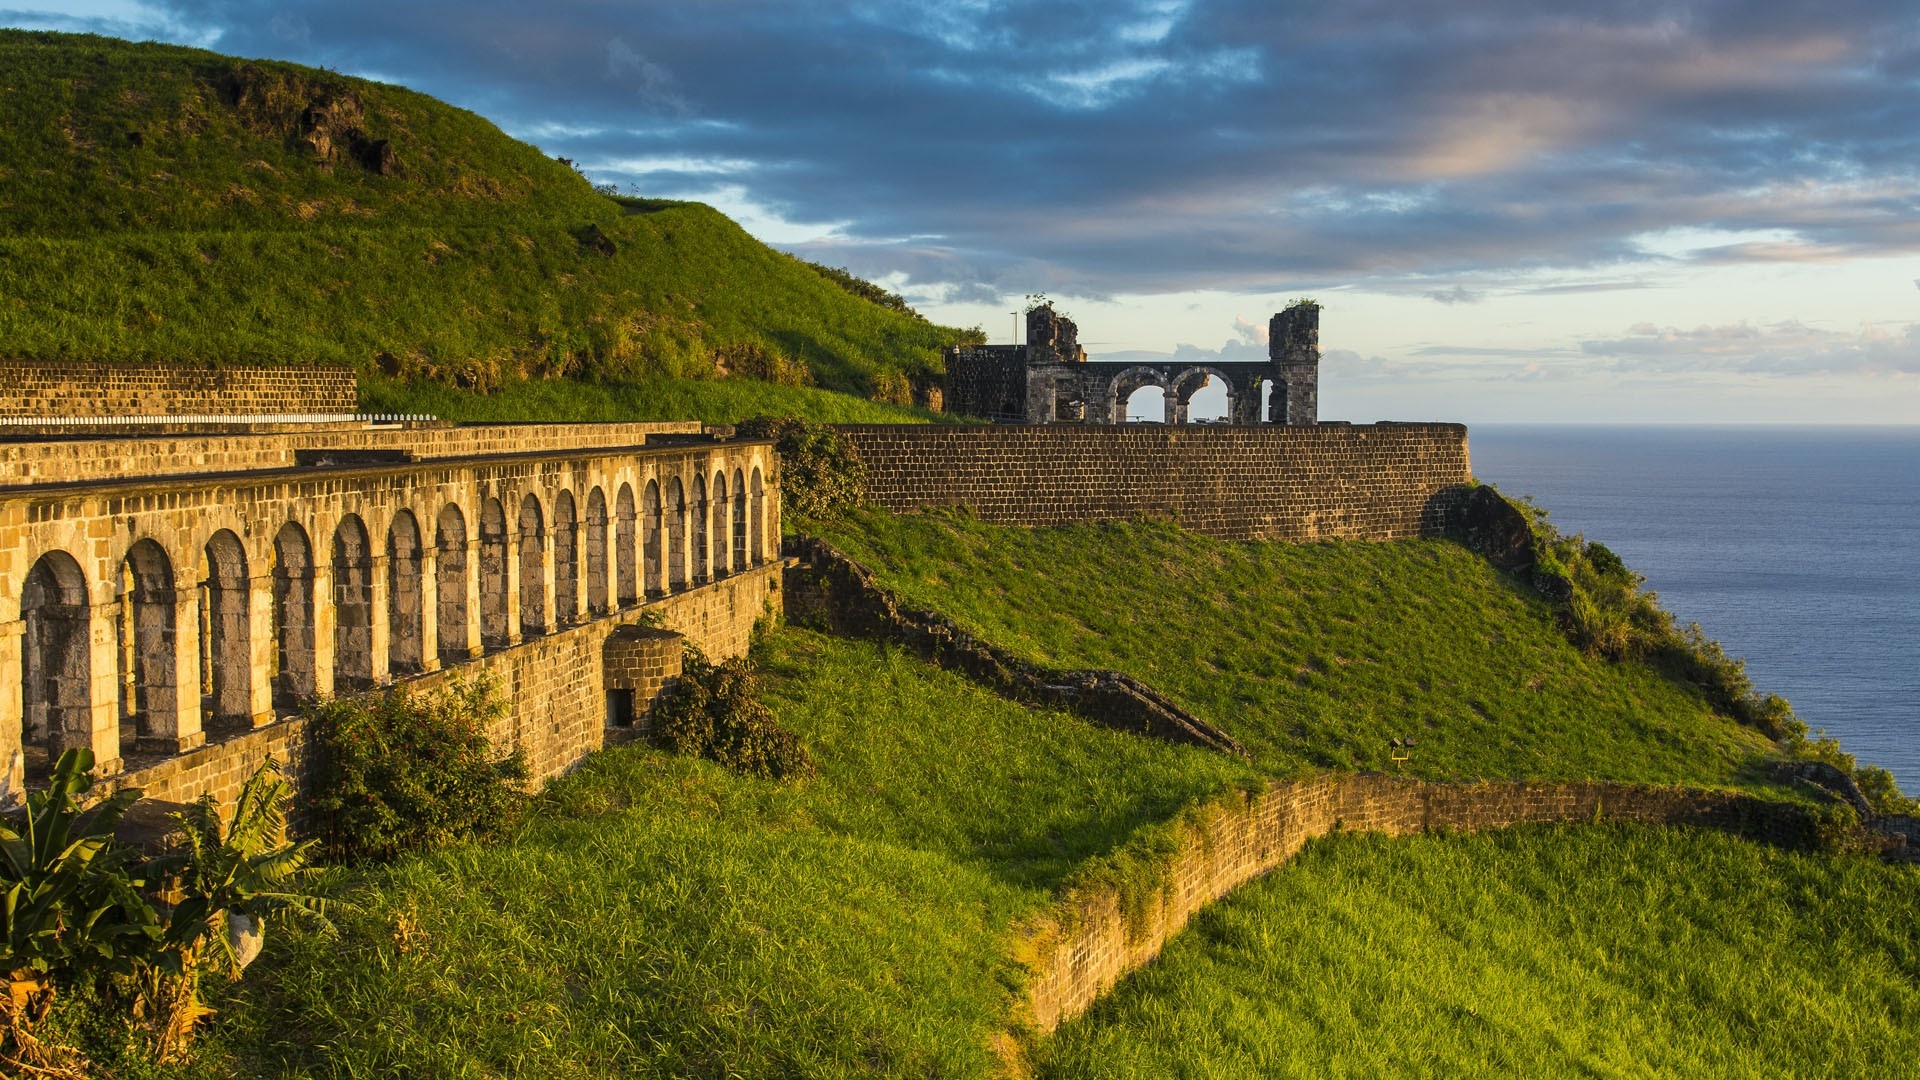 Saint Kitts and Nevis: Brimstone Hill Fortress by sea, Fort George Citadel, Caribbean. 1920x1080 Full HD Background.